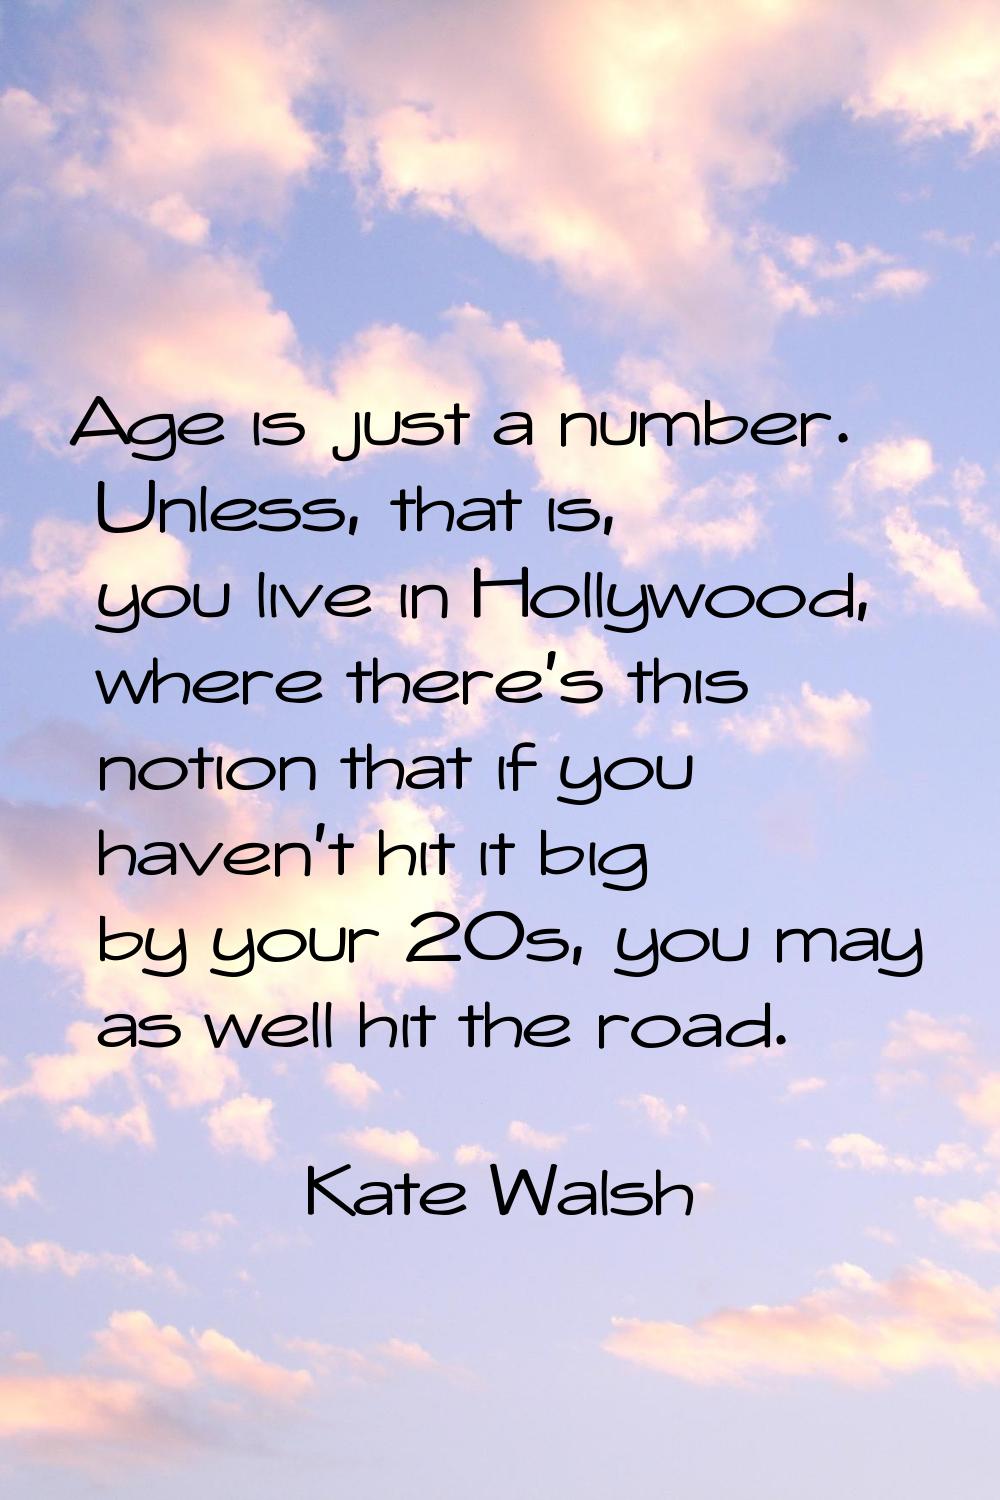 Age is just a number. Unless, that is, you live in Hollywood, where there's this notion that if you